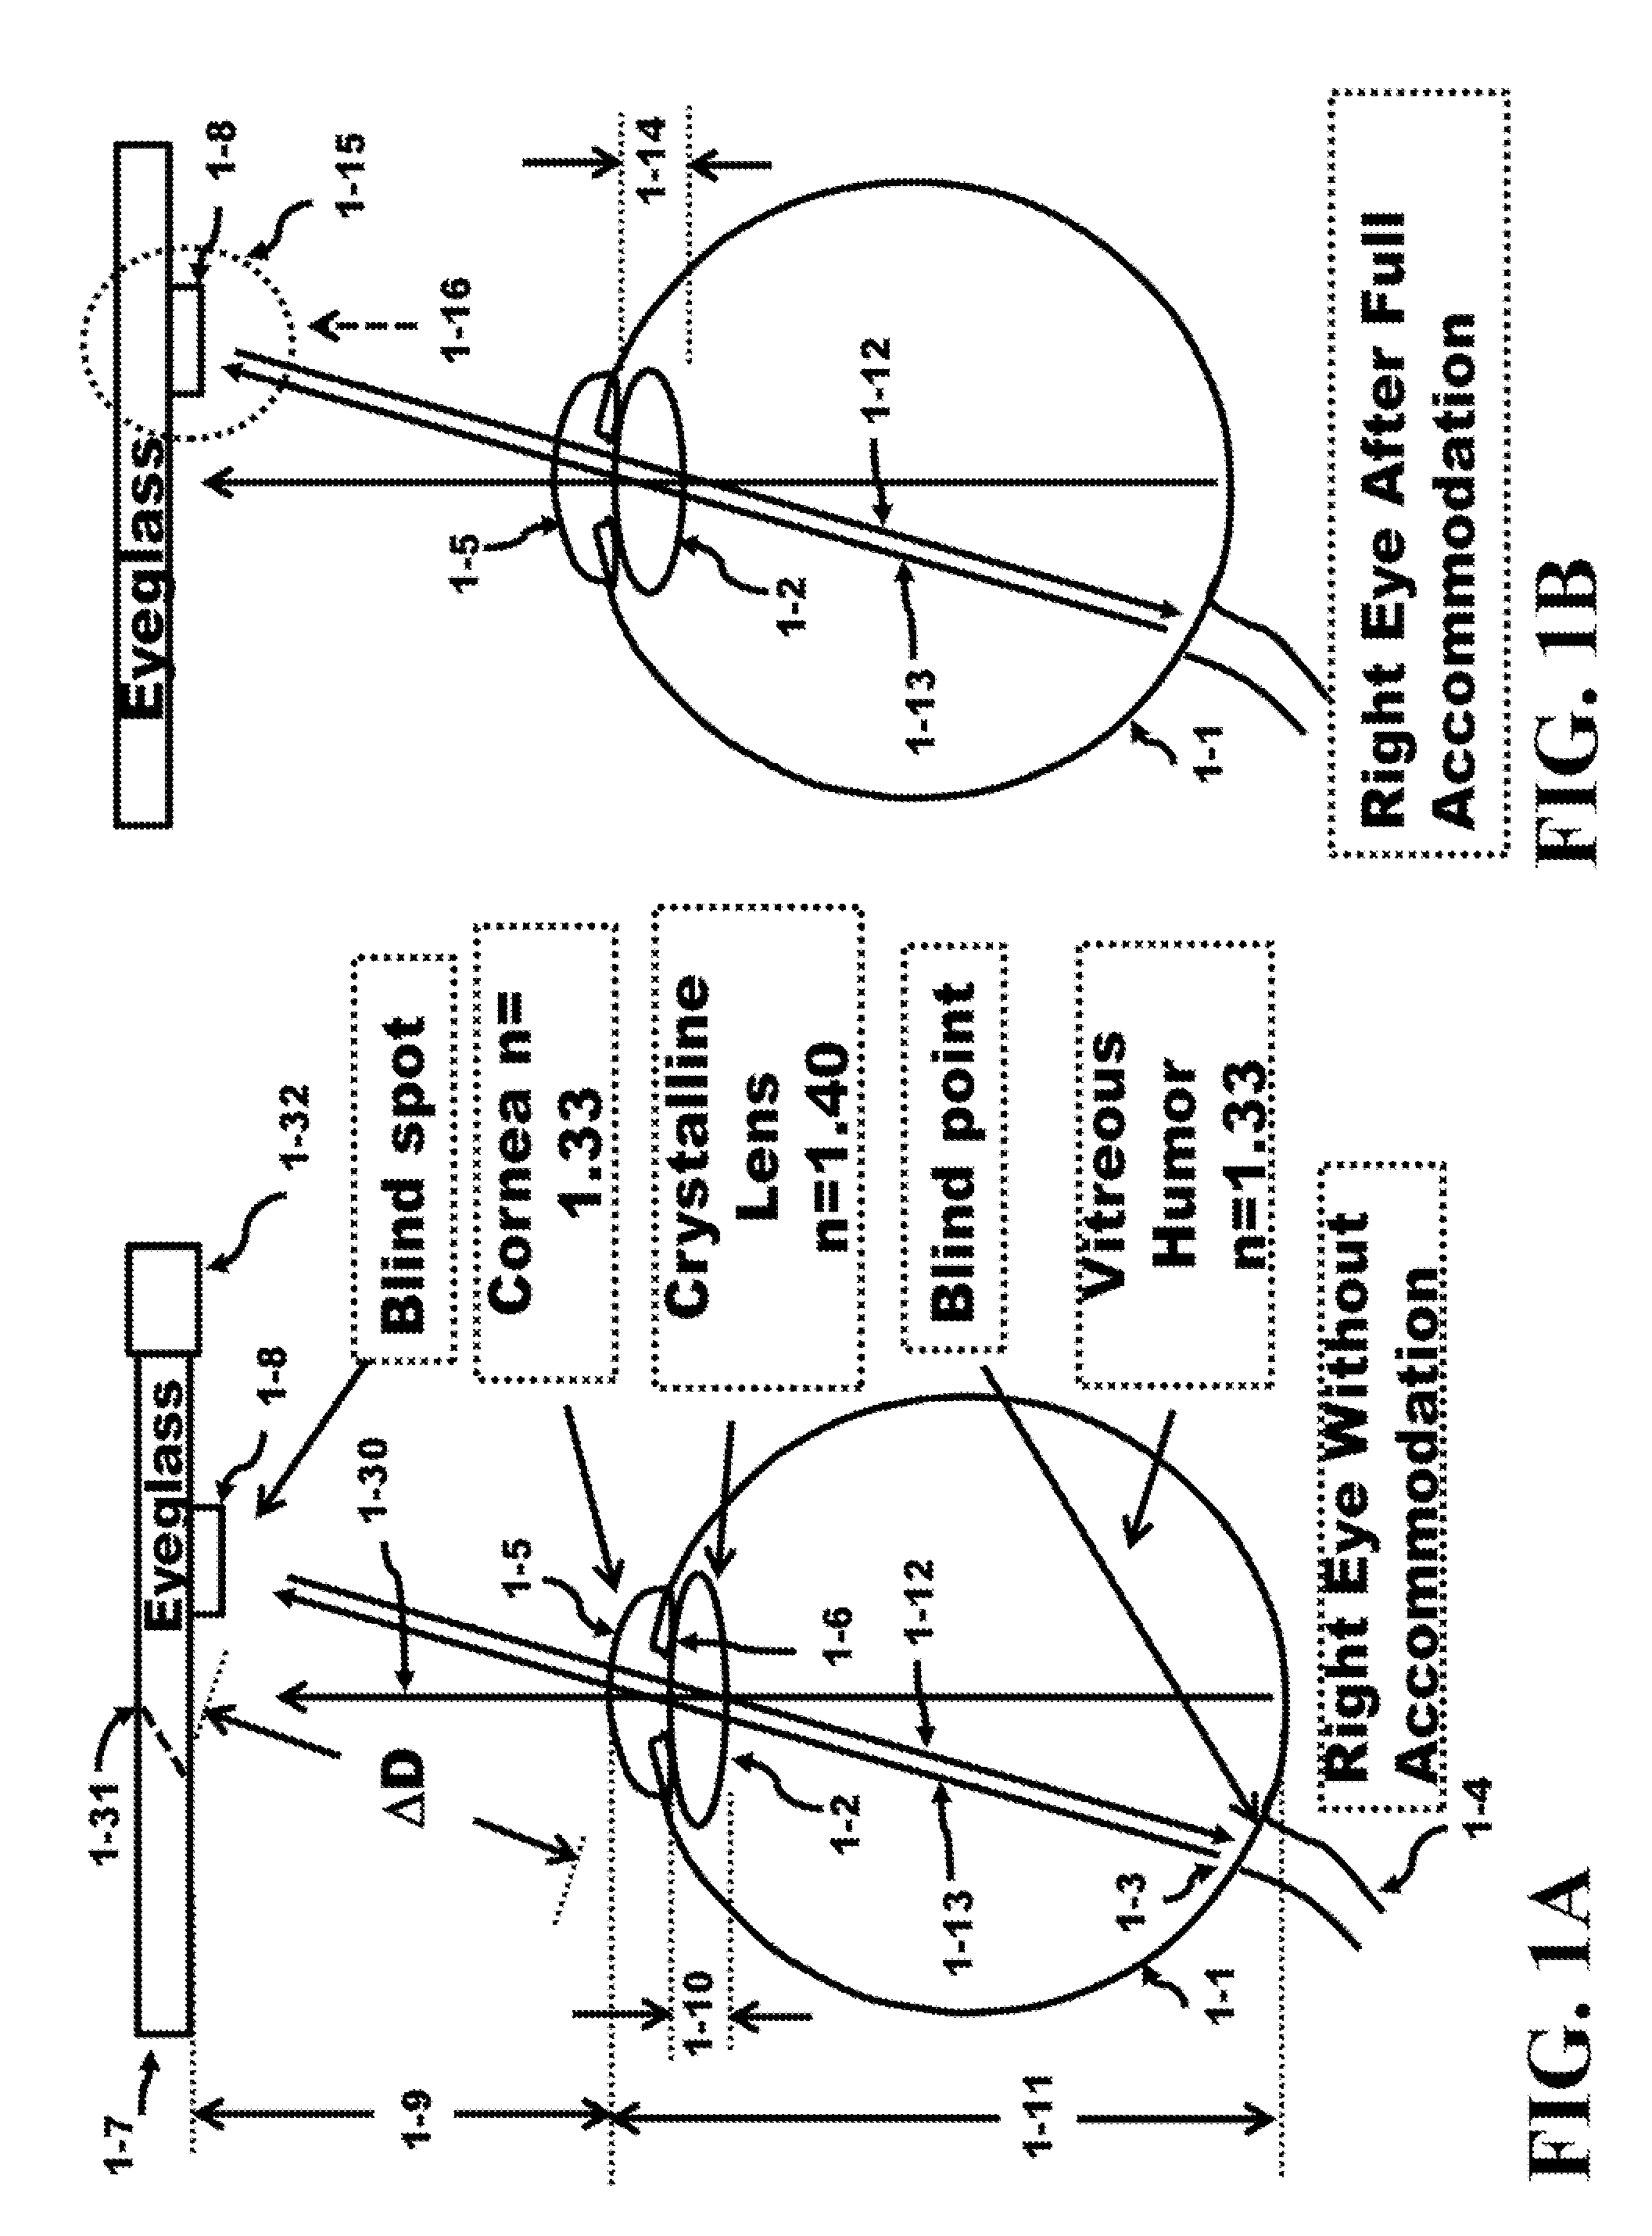 Method and Apparatus for a Self-Focusing Camera and Eyeglass System